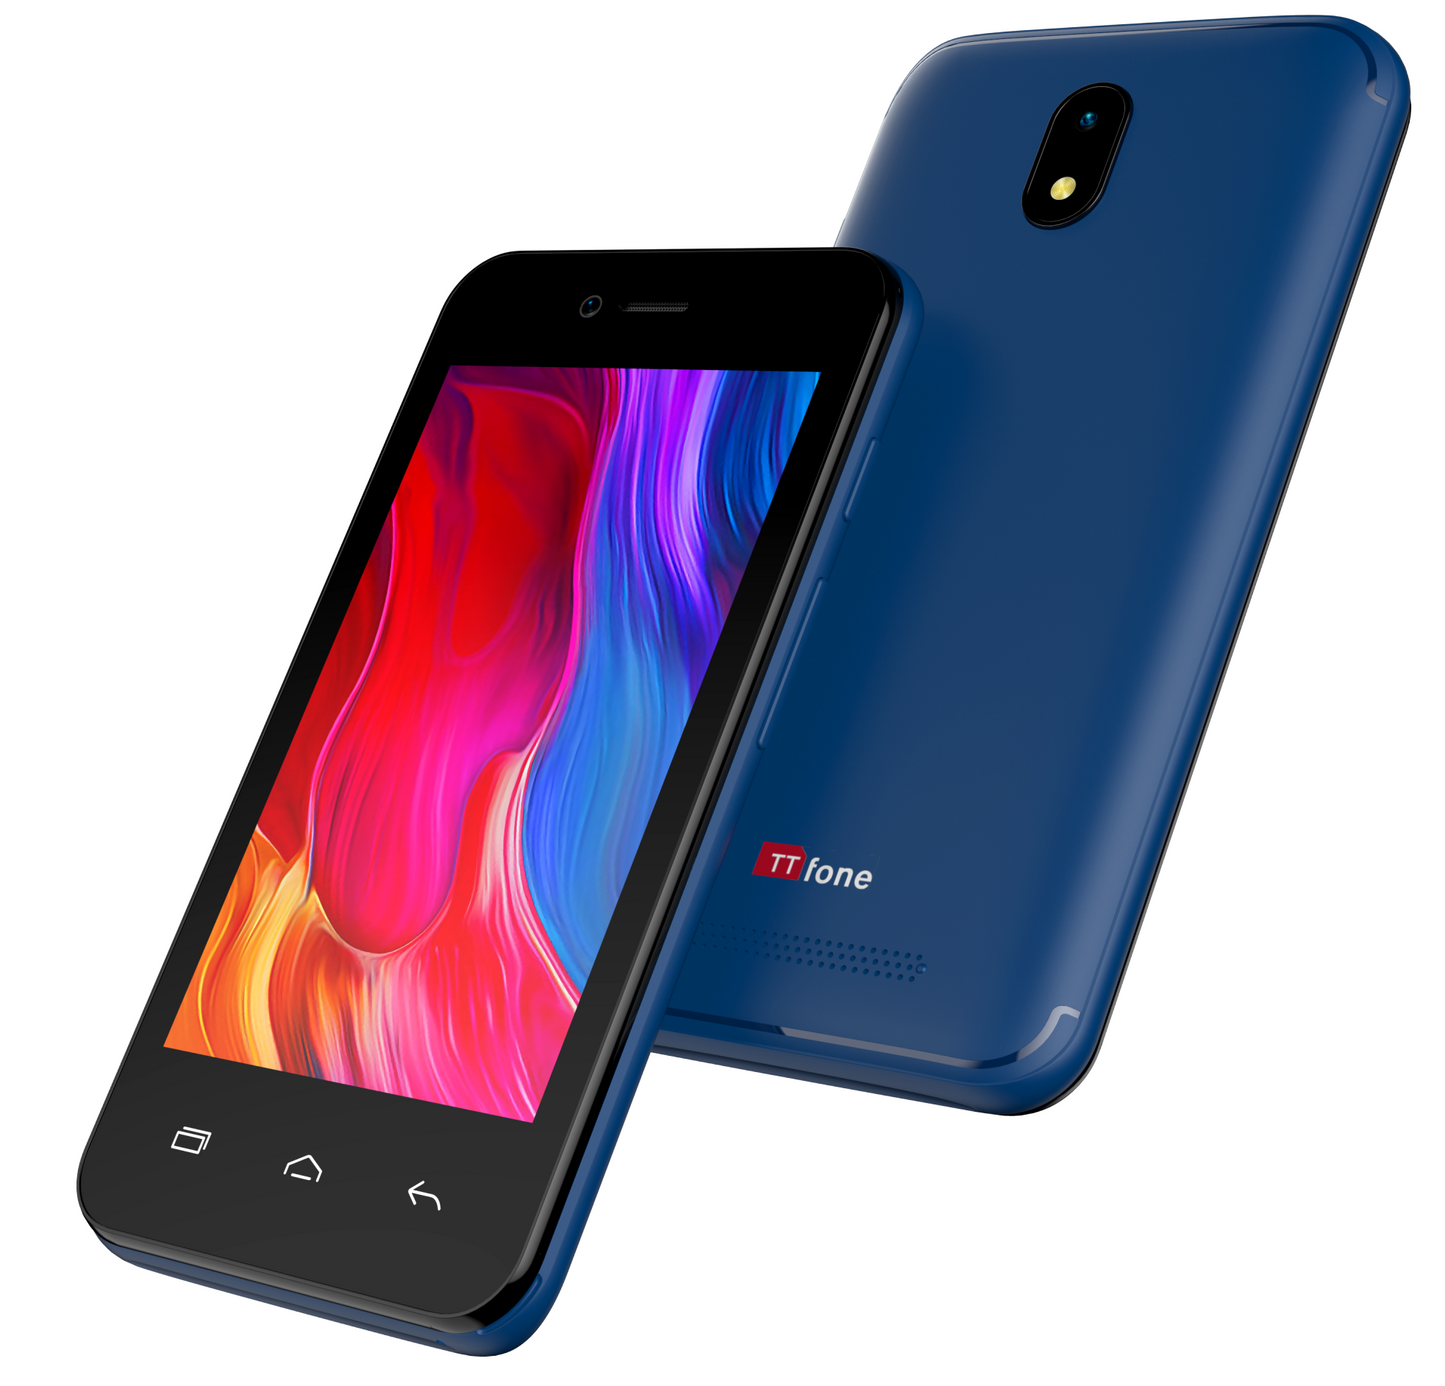 TTfone Blue TT20 Dual SIM - Warehouse Deals with Mains Charger and Giff Gaff Pay As You Go Sim Card